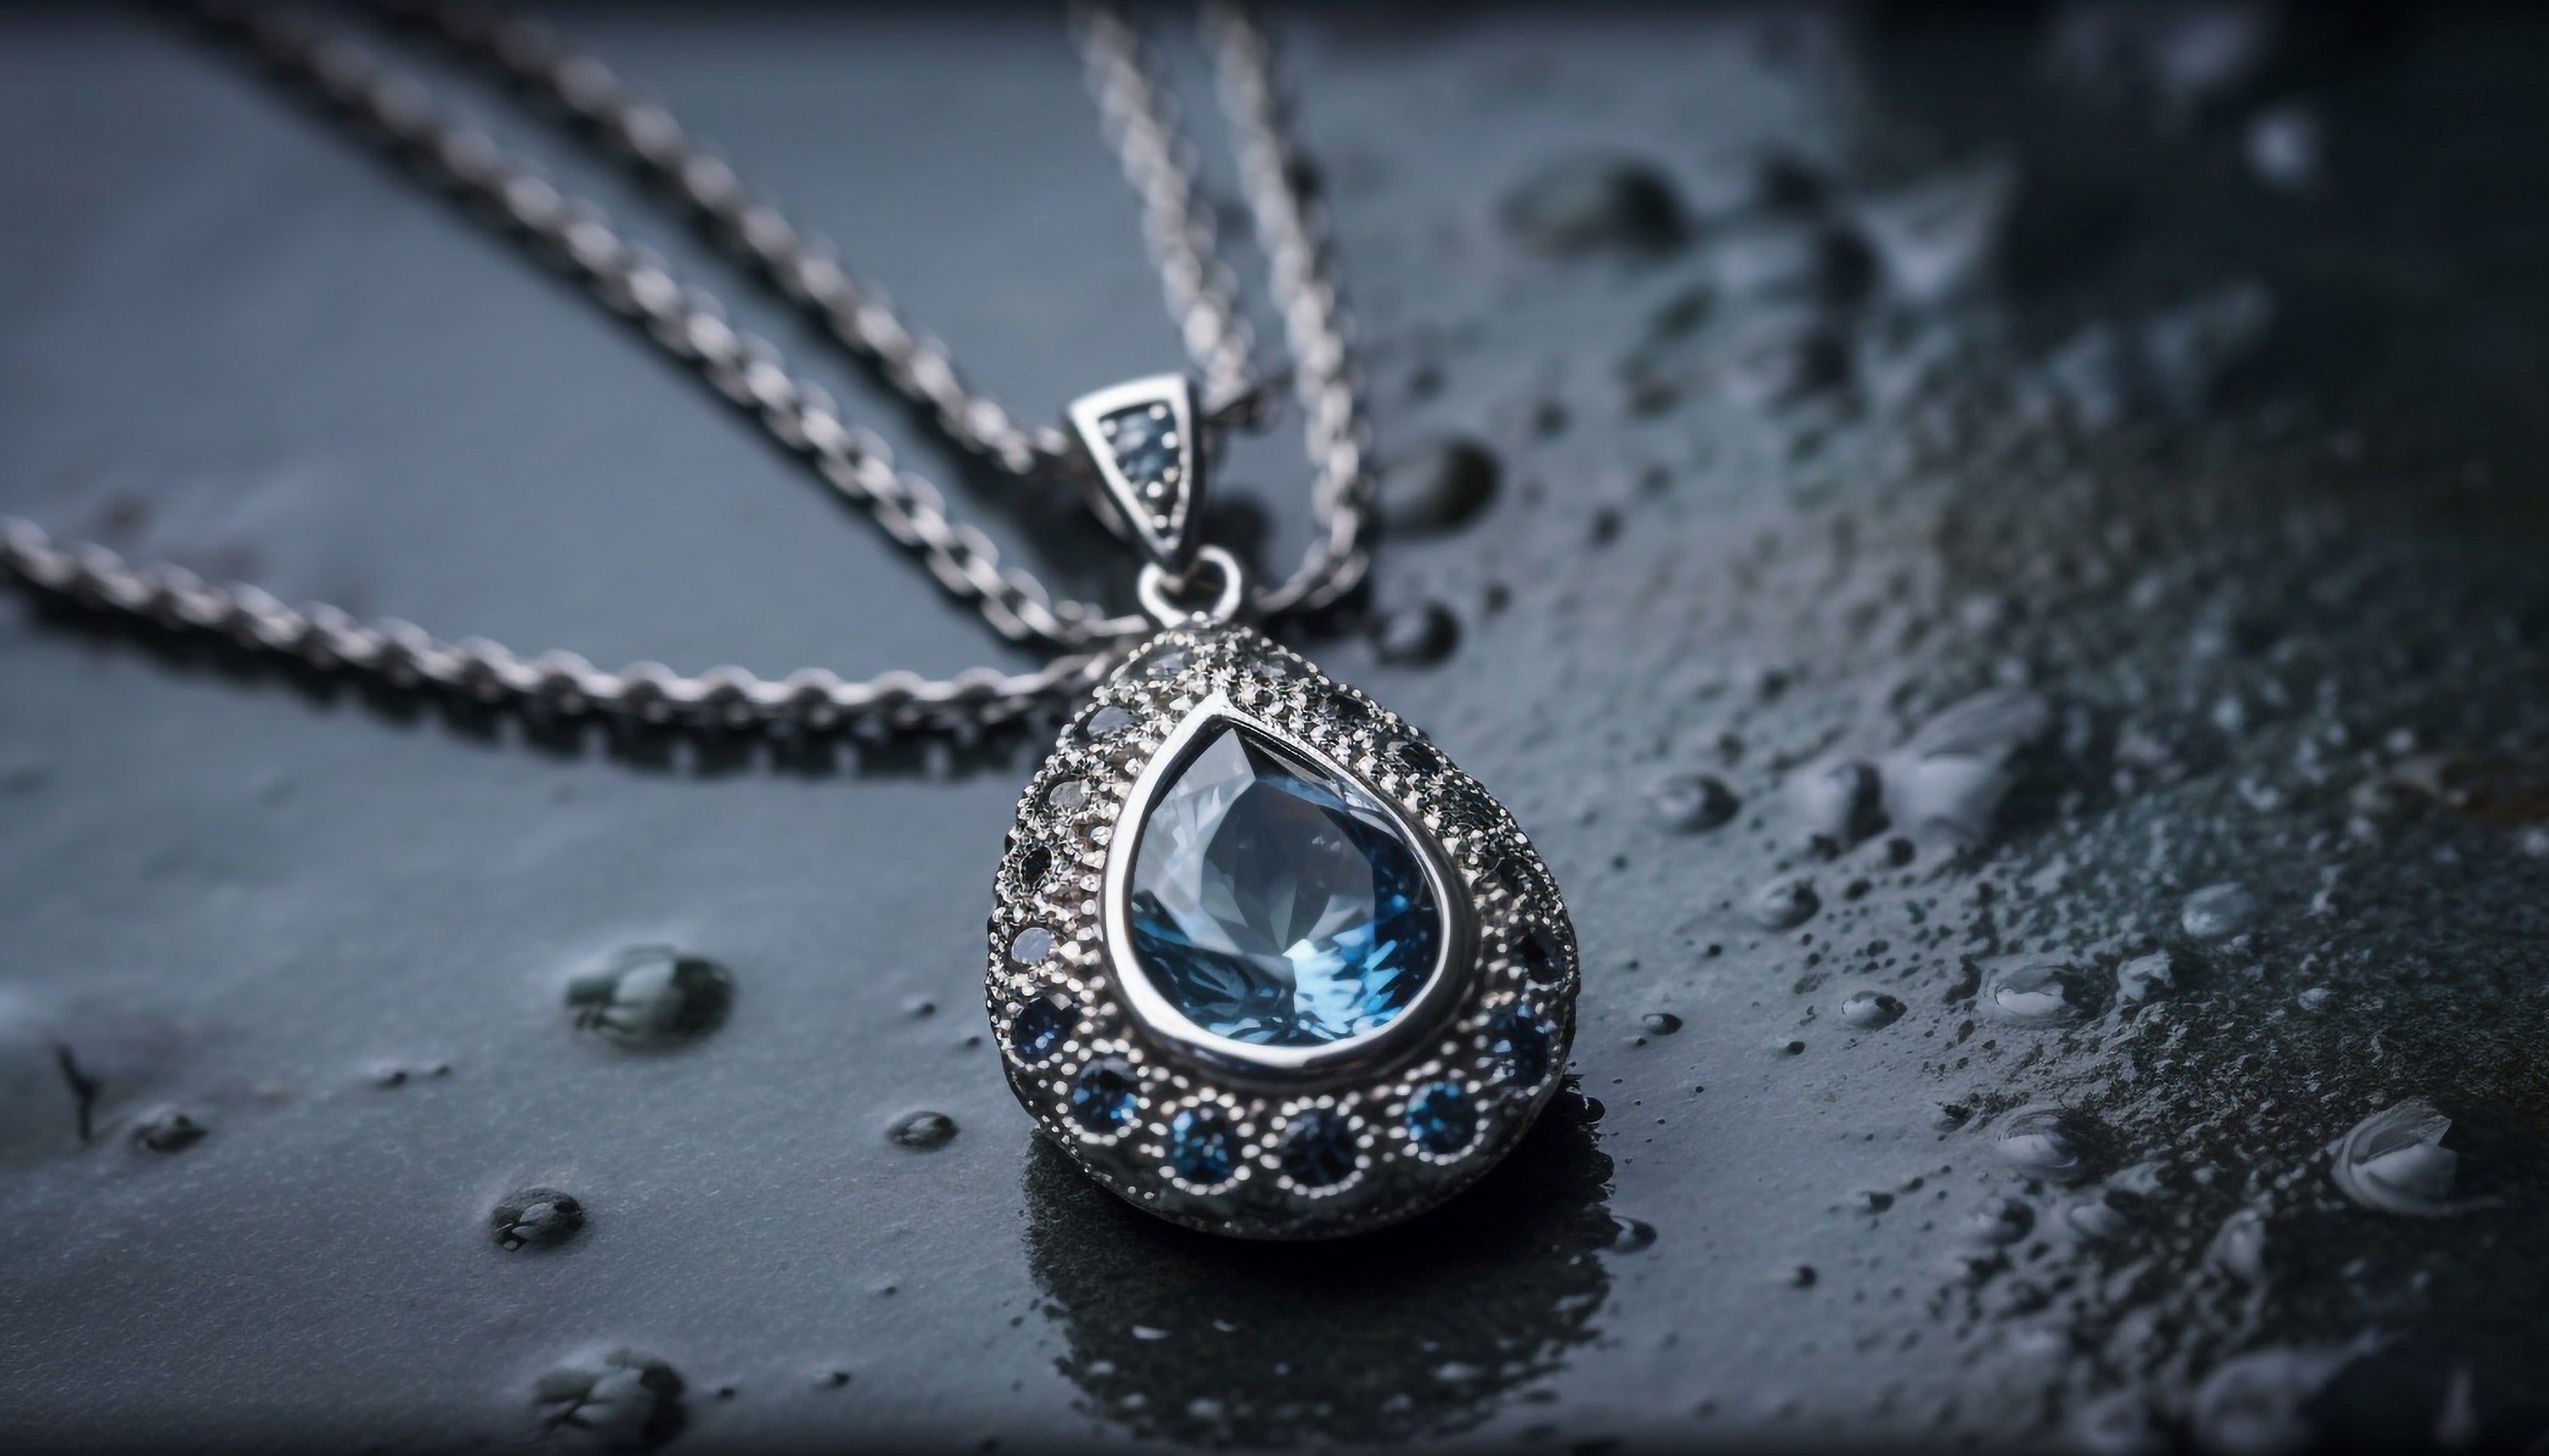 A pendant necklace: How to Wear It?